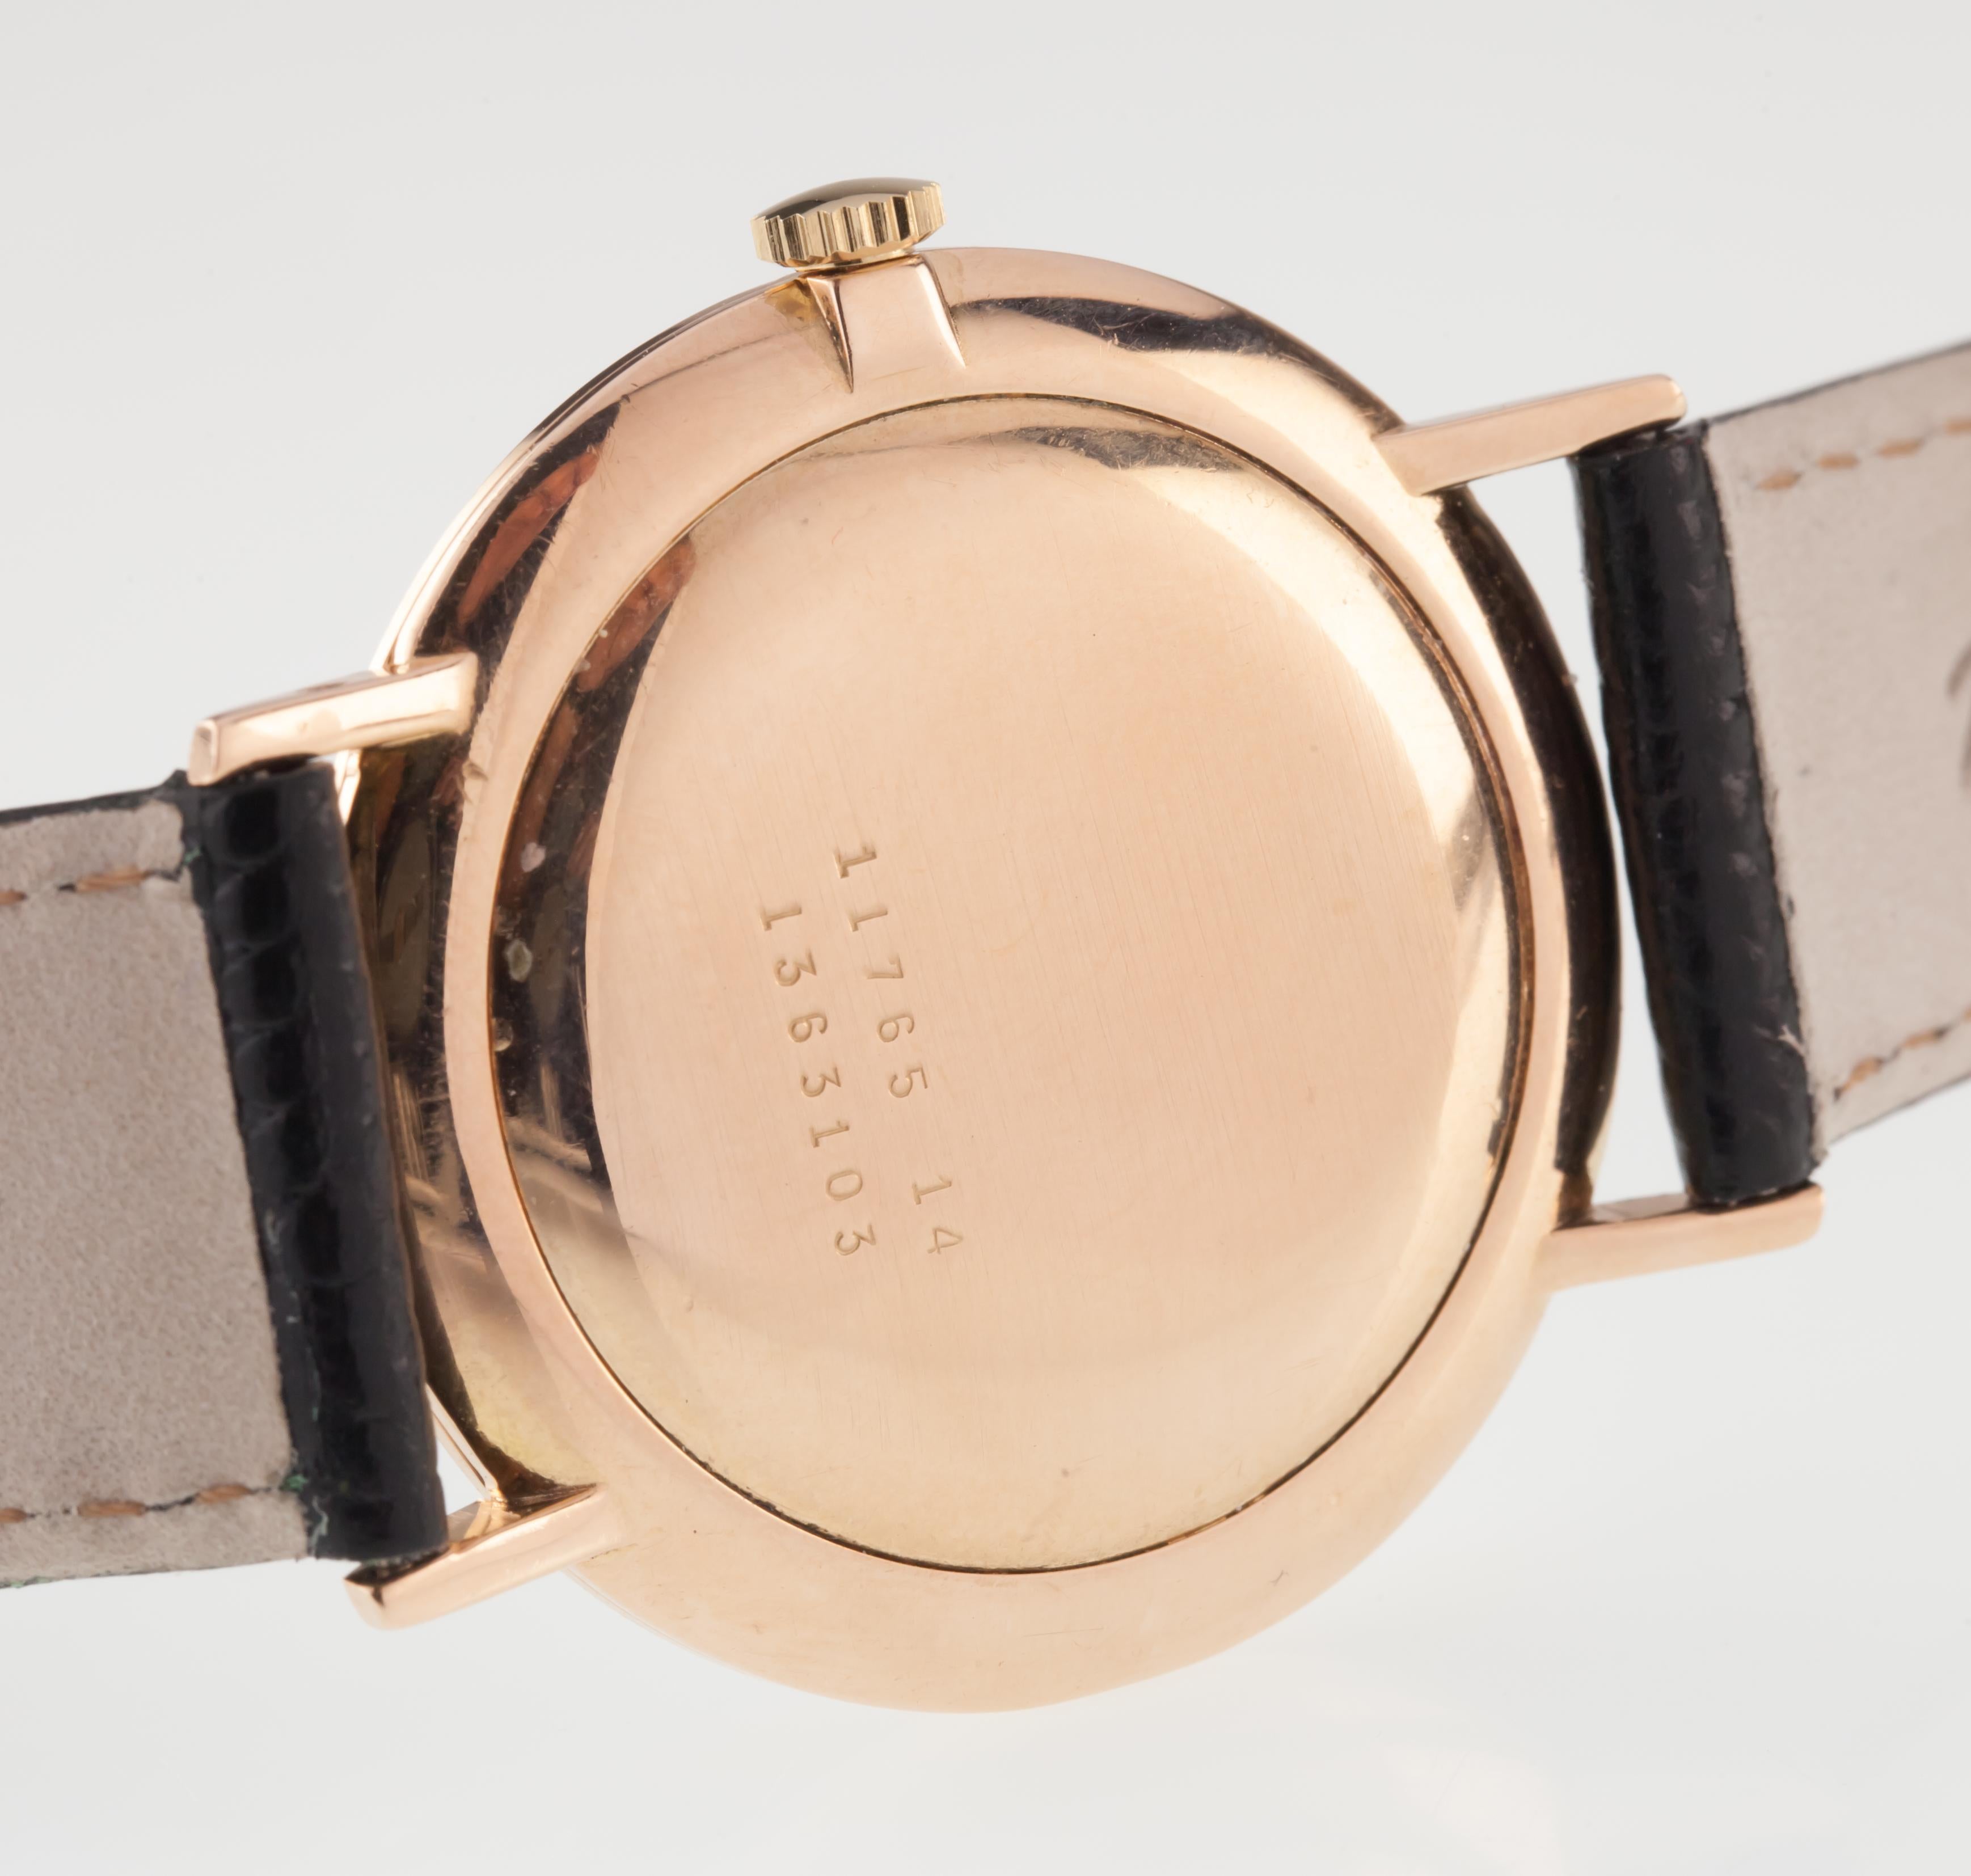 Doxa 14k Rose Gold Hand-Winding Anti-Magnetic Watch w/ Date Movement #111 In Good Condition For Sale In Sherman Oaks, CA